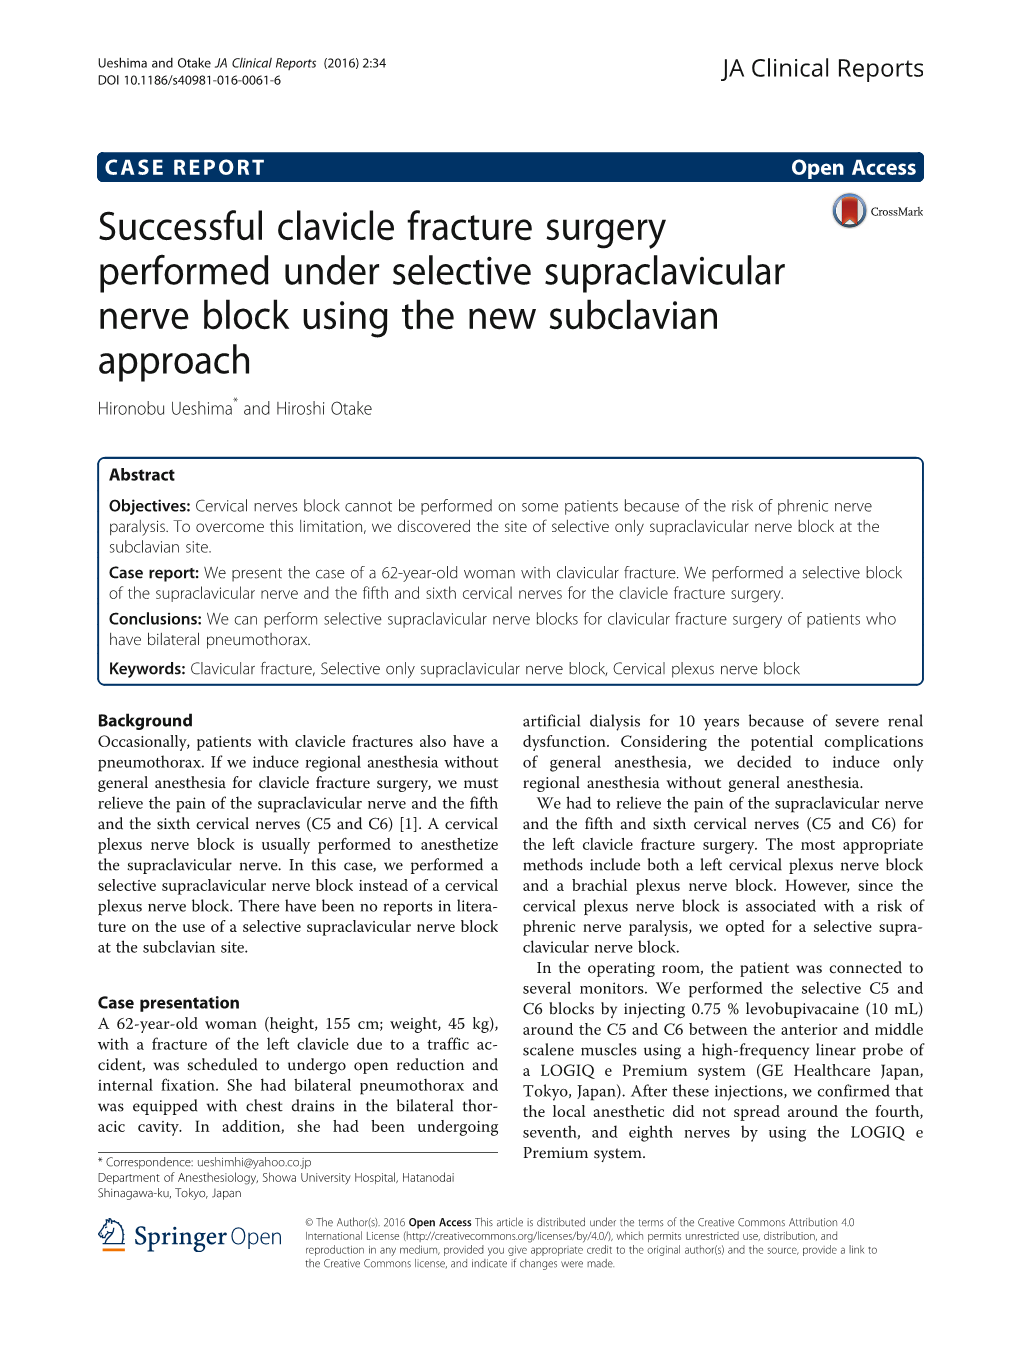 Successful Clavicle Fracture Surgery Performed Under Selective Supraclavicular Nerve Block Using the New Subclavian Approach Hironobu Ueshima* and Hiroshi Otake